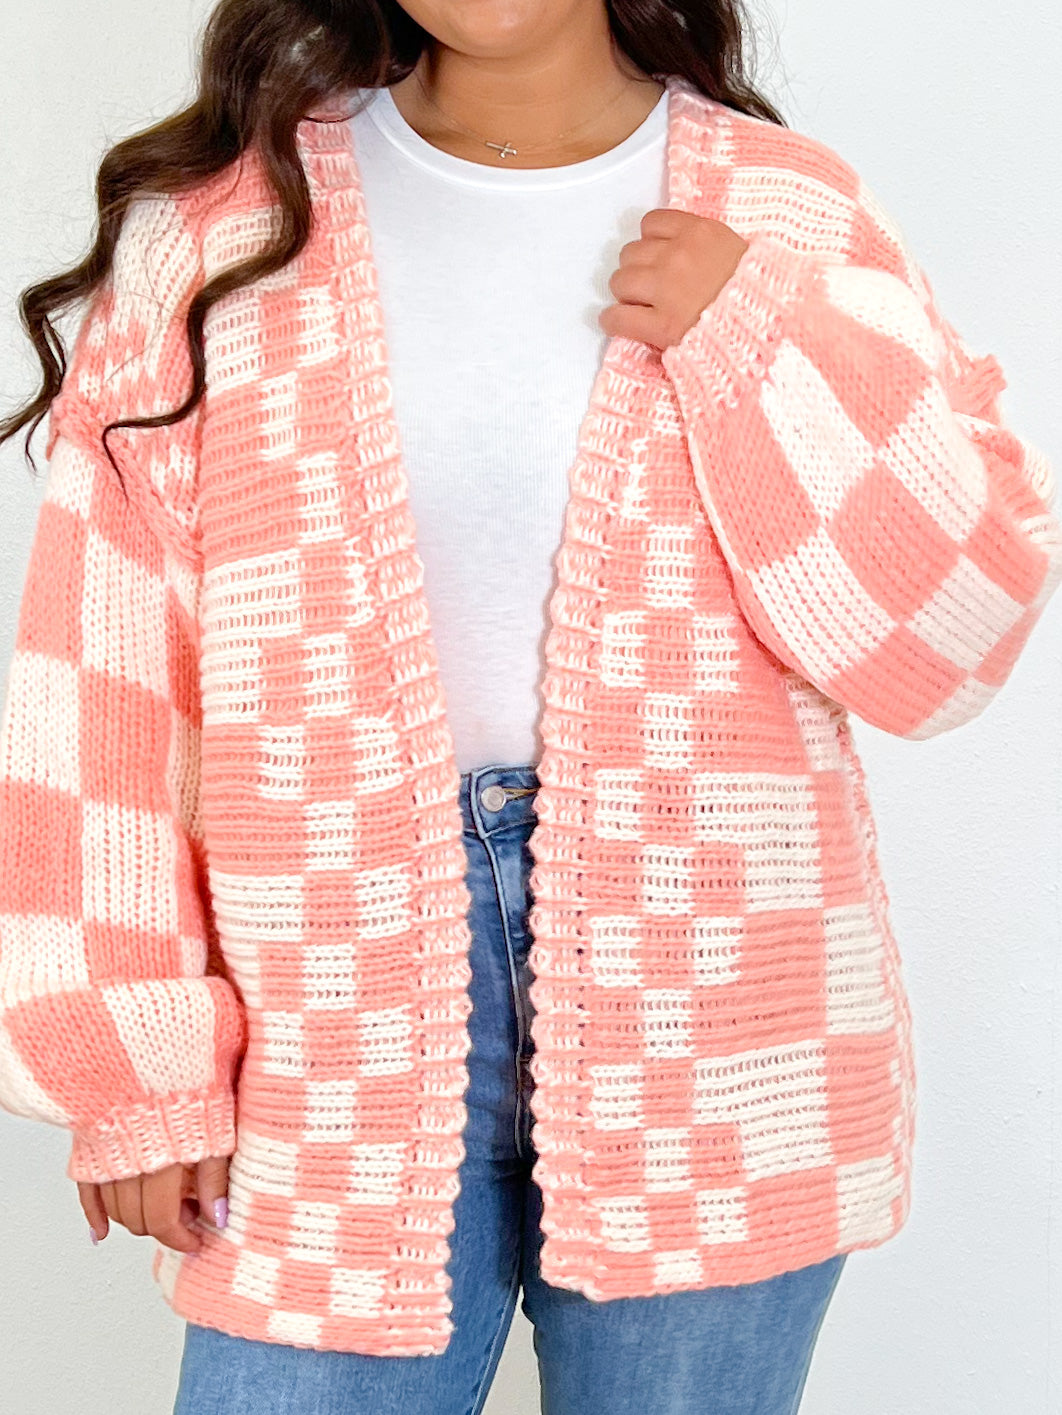 Check It Out Cardigan | Blush | +Plus Available | RESTOCK! – Shop